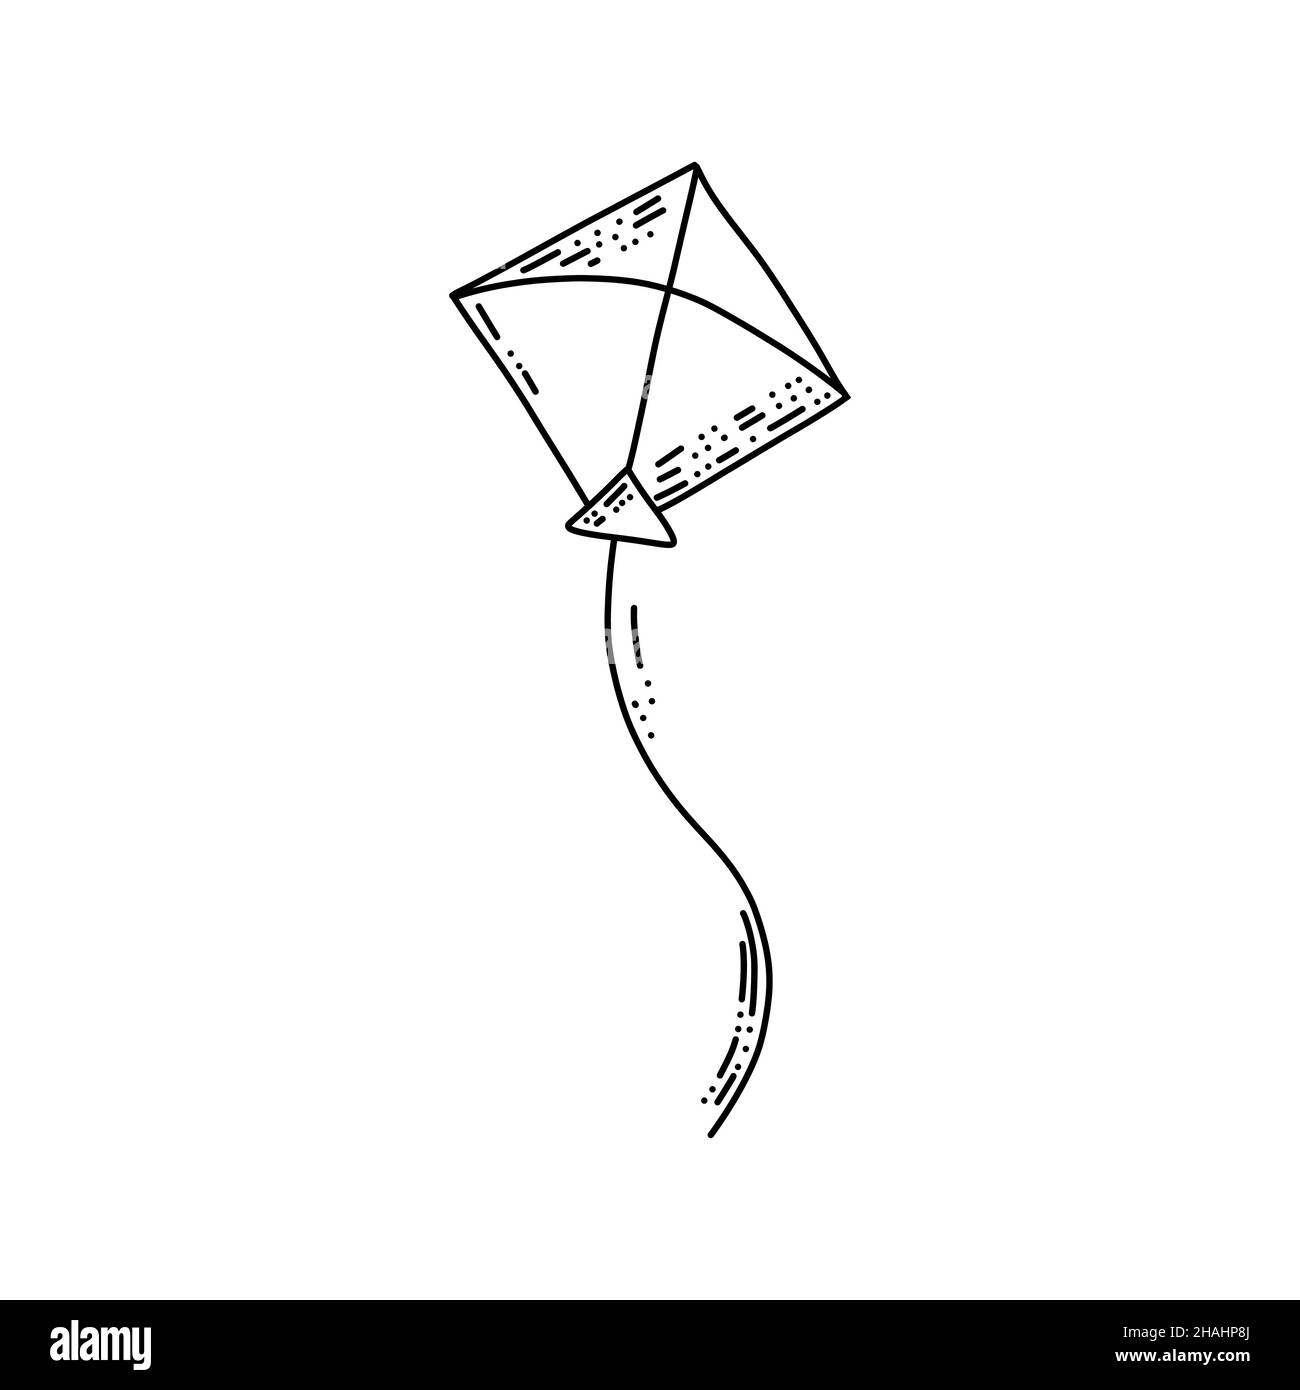 Hand drawn kite in doodle style. Retro linear illustration with black kite doodle on white background Stock Vector